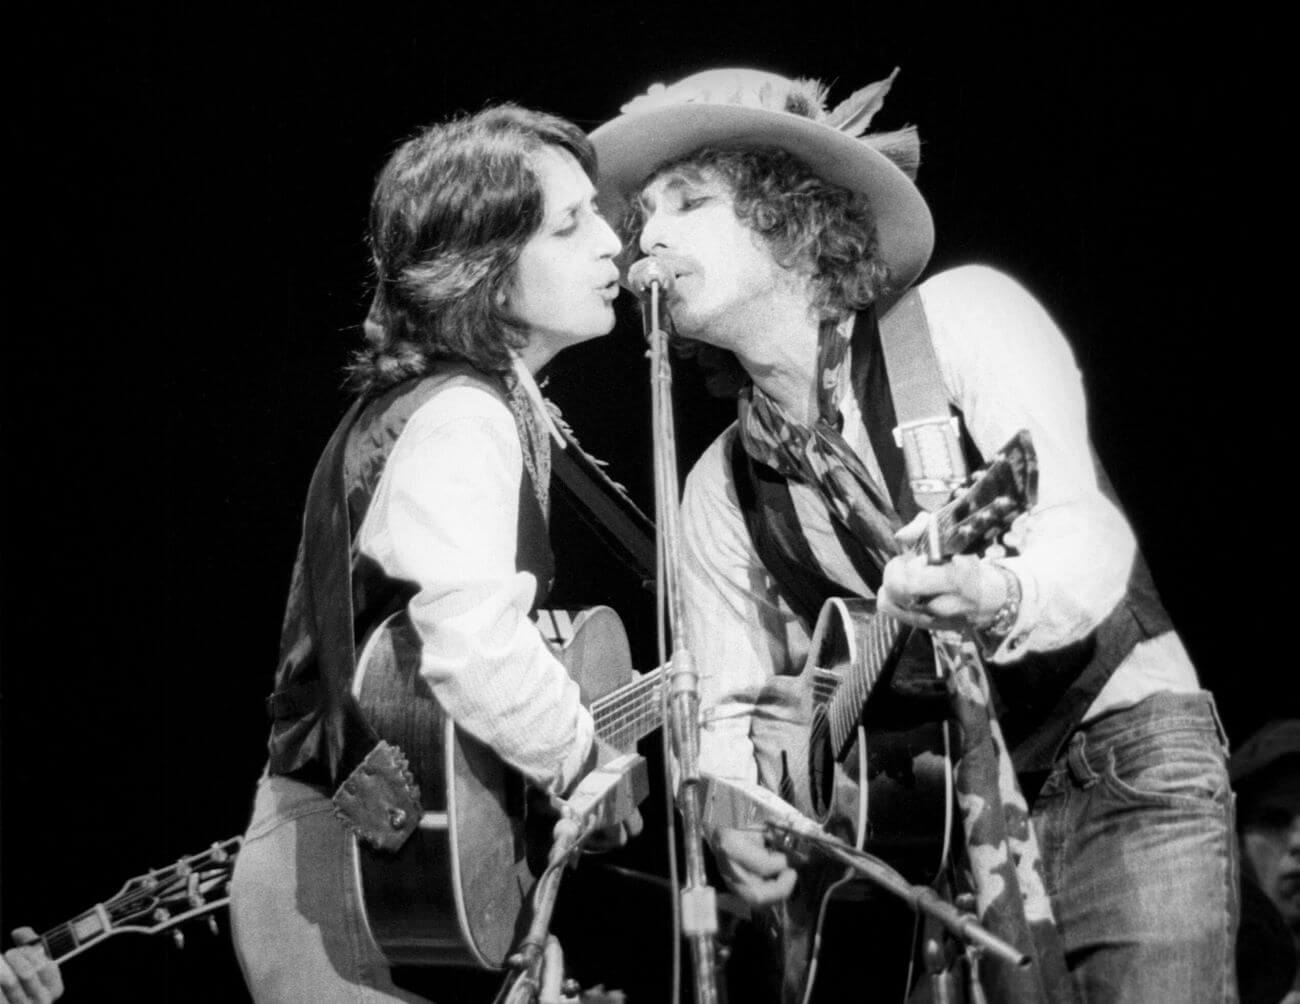 A black and white picture of Bob Dylan and Joan Baez playing guitars and singing into the same microphone.